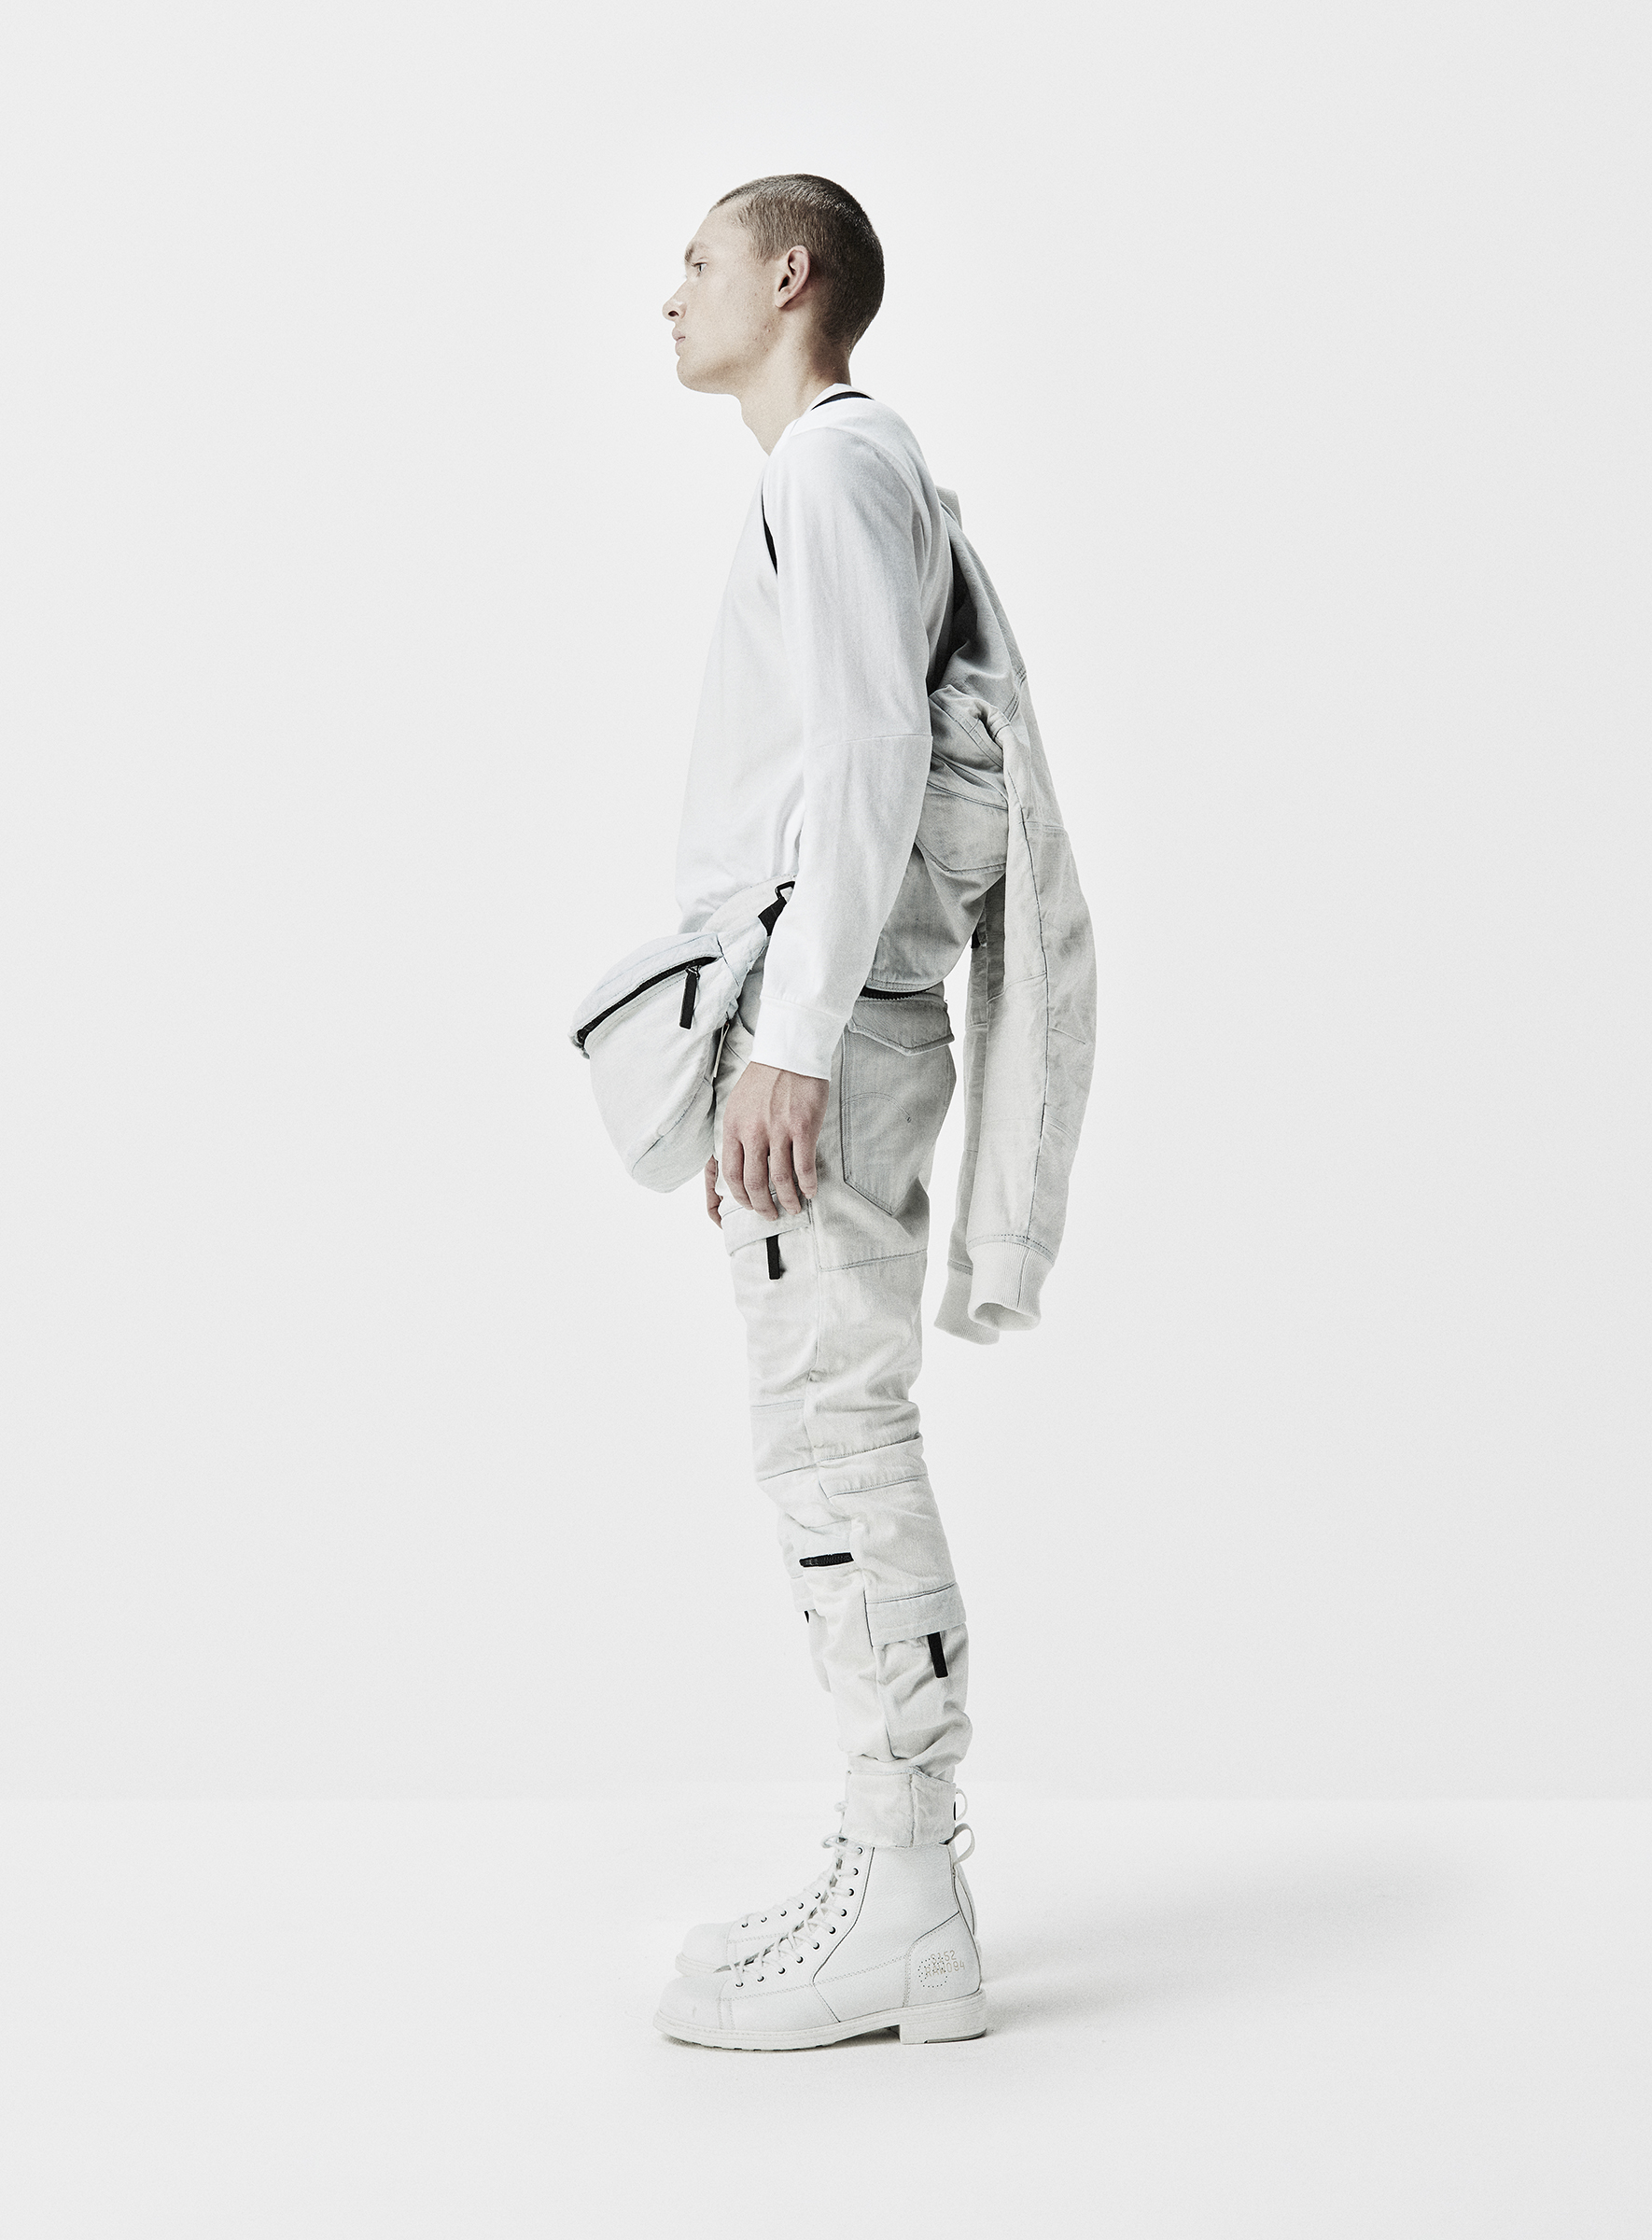 G Star Raw Research 8